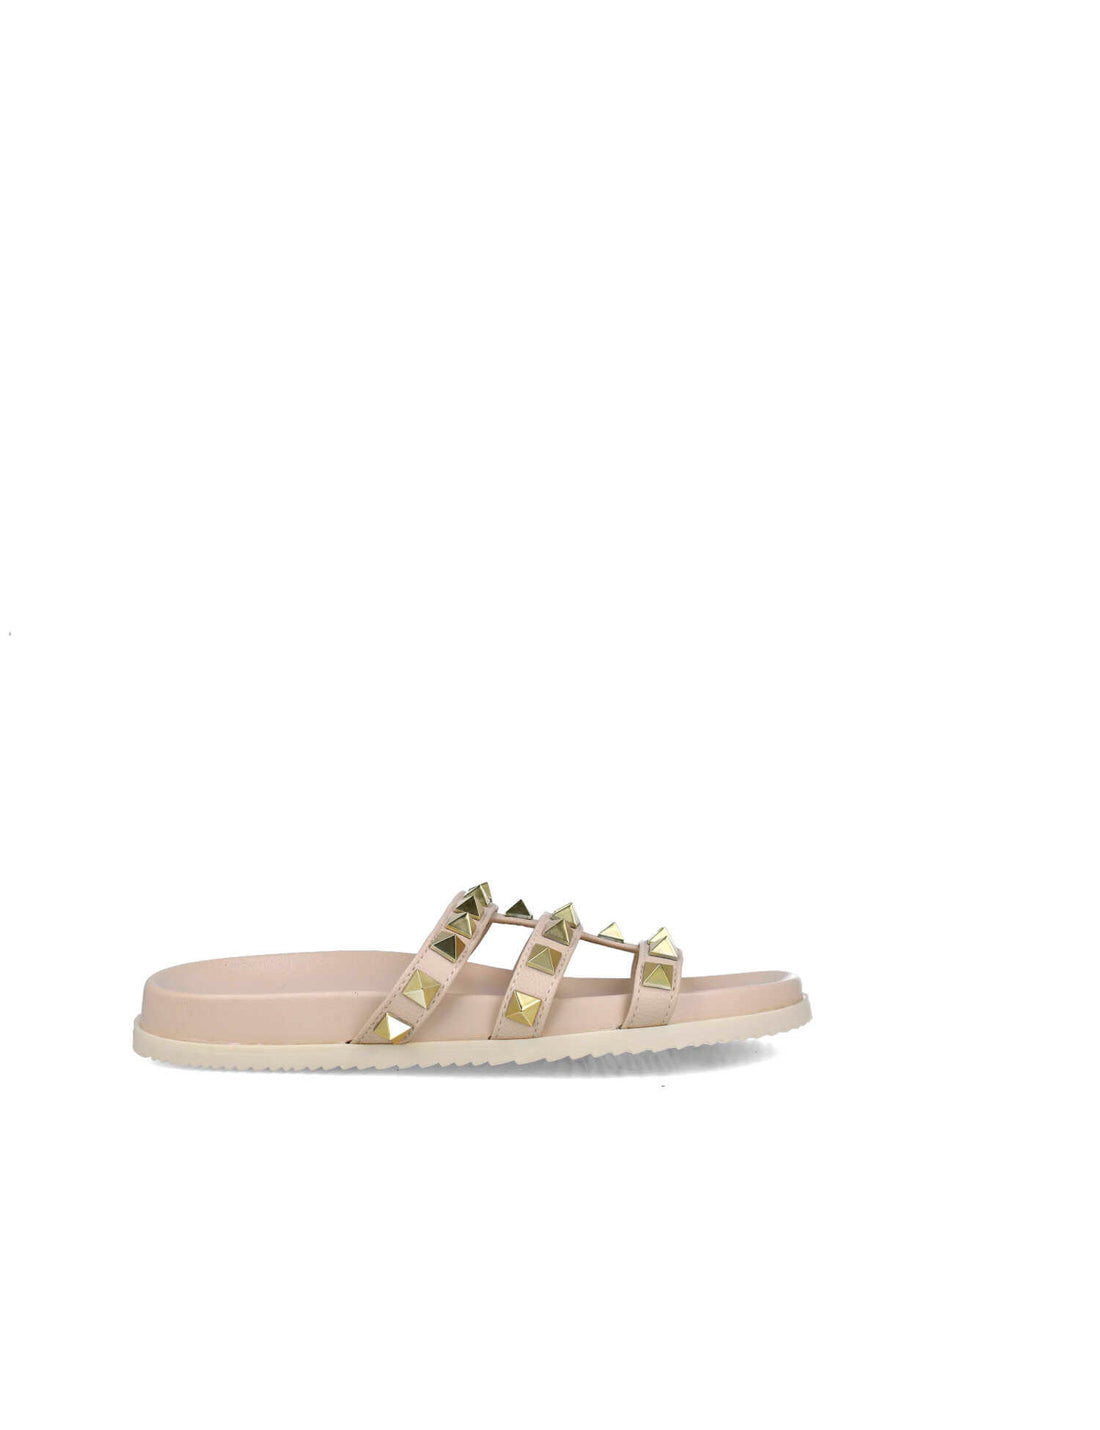 Beige Studded Slippers_24921_06_01